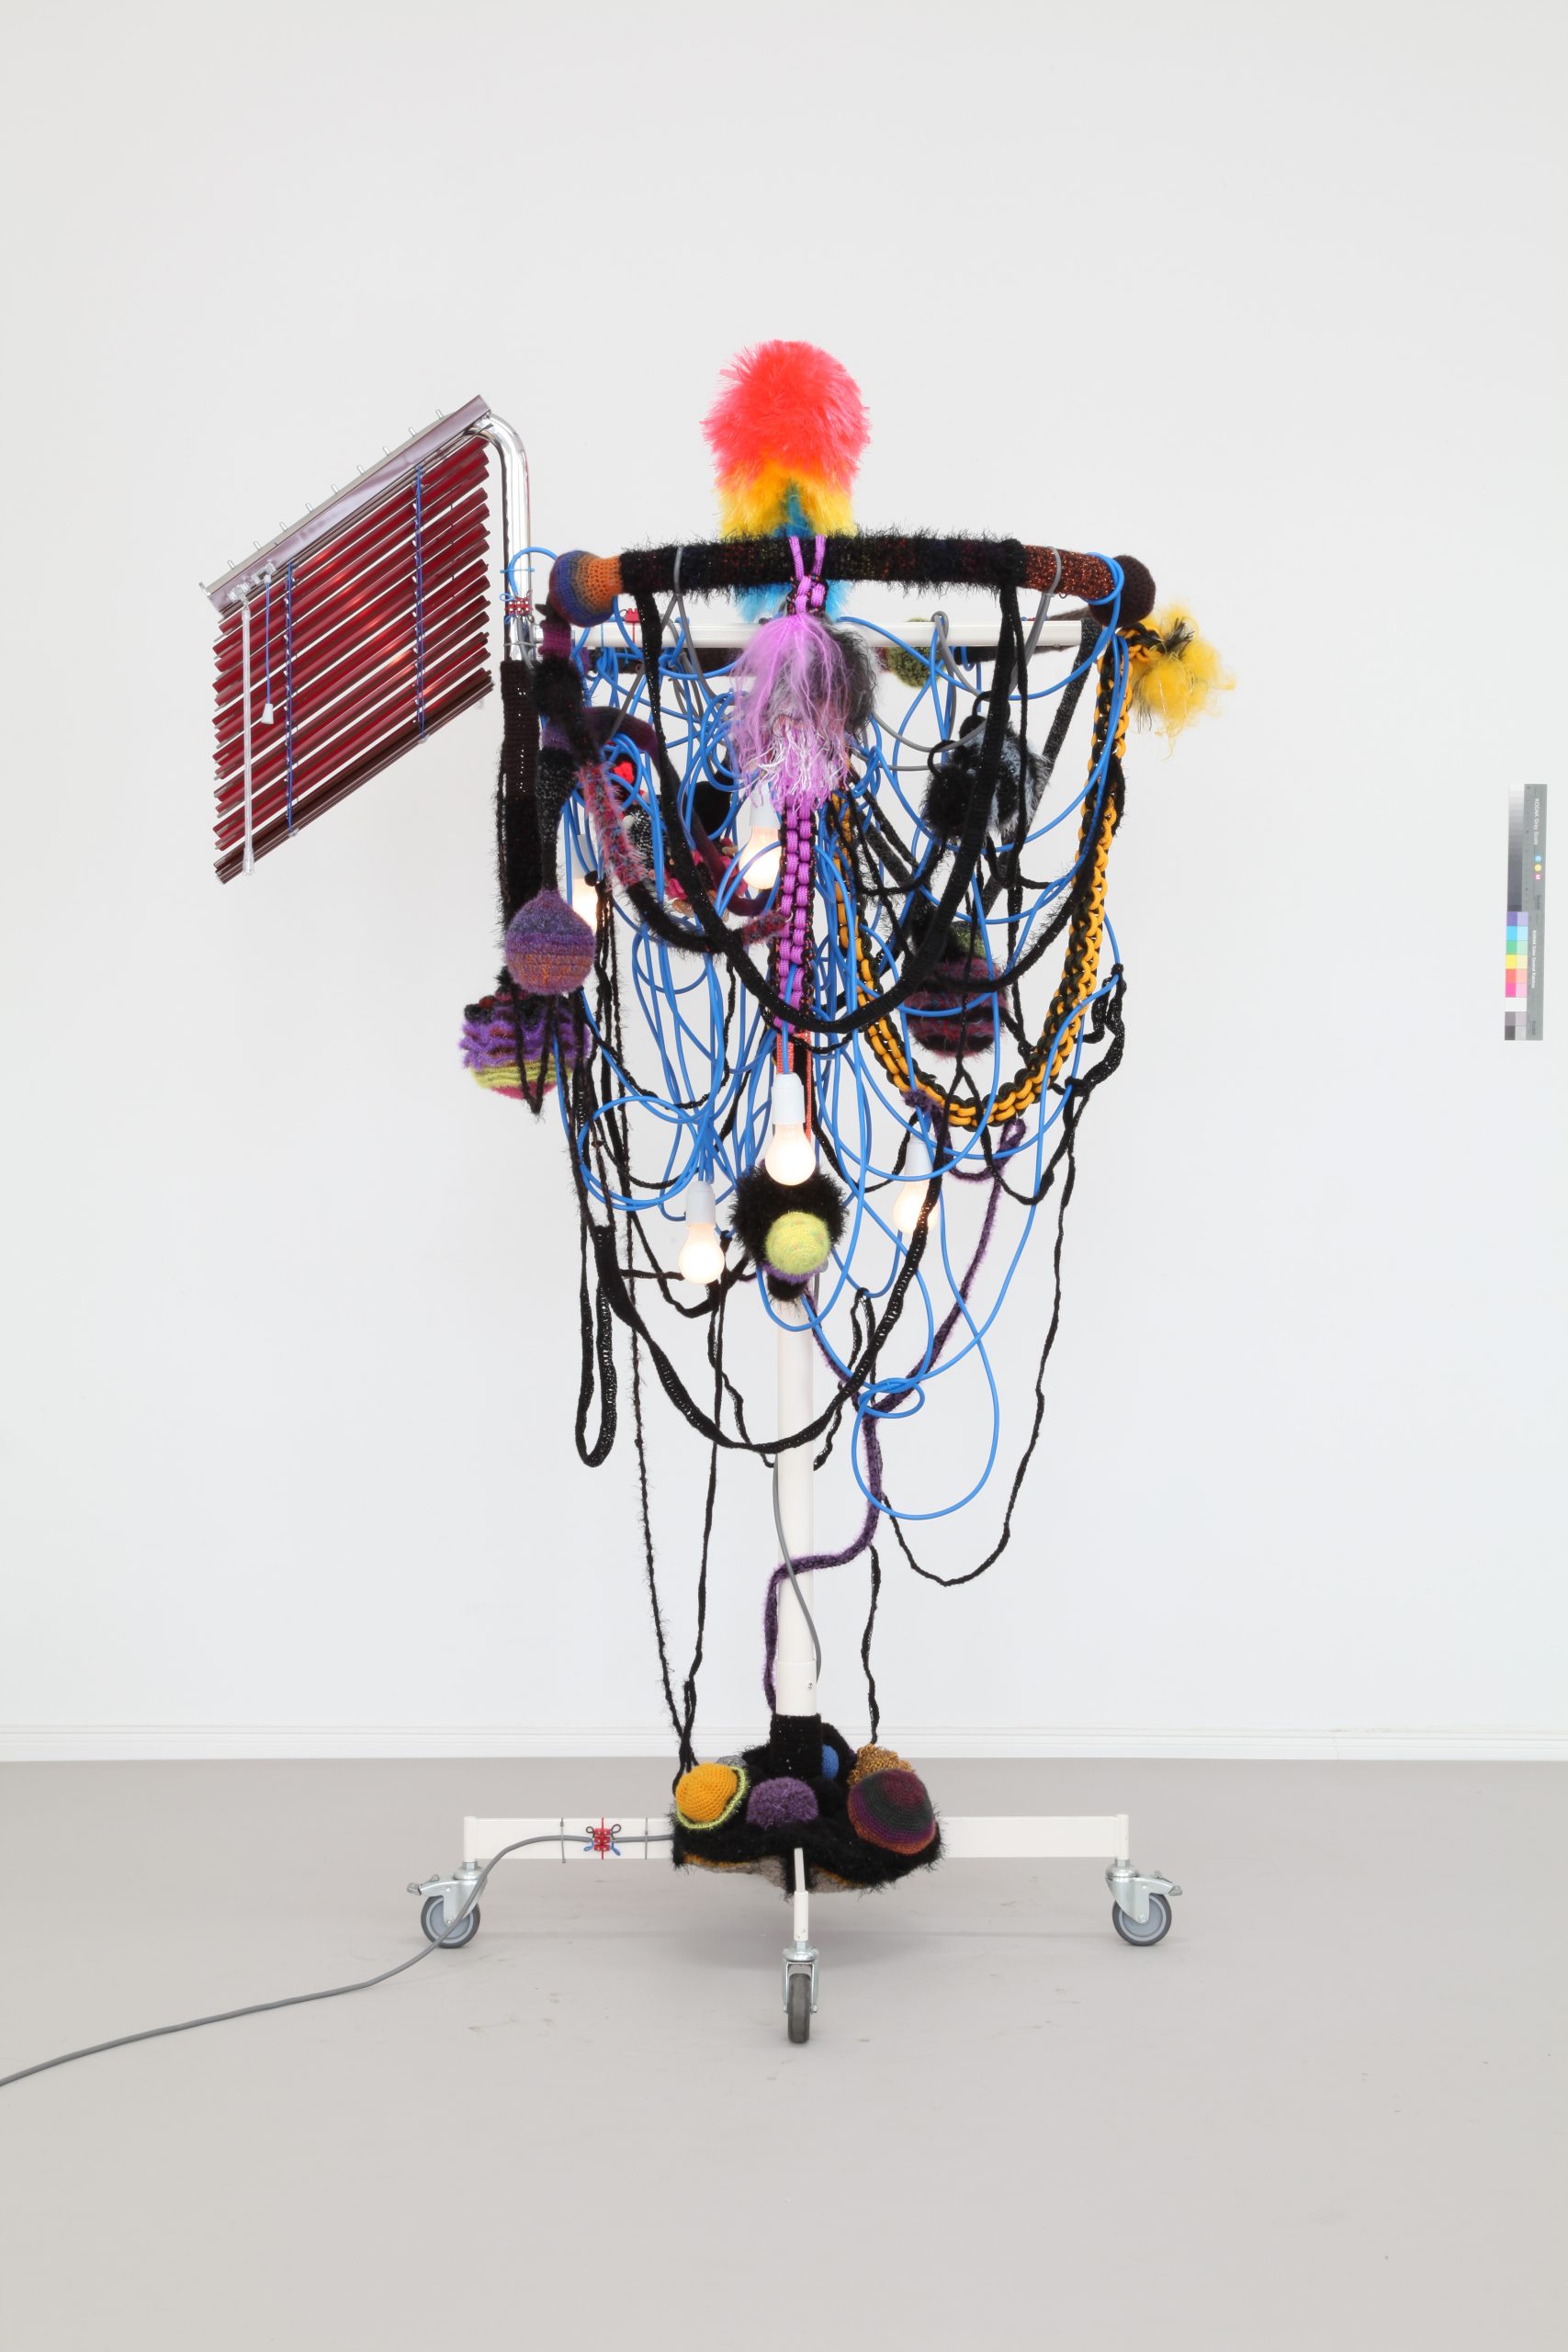 Photograph of sculpture made from a clothing rack draped in cable, rope, cord, light bulbs and aluminum blinds.